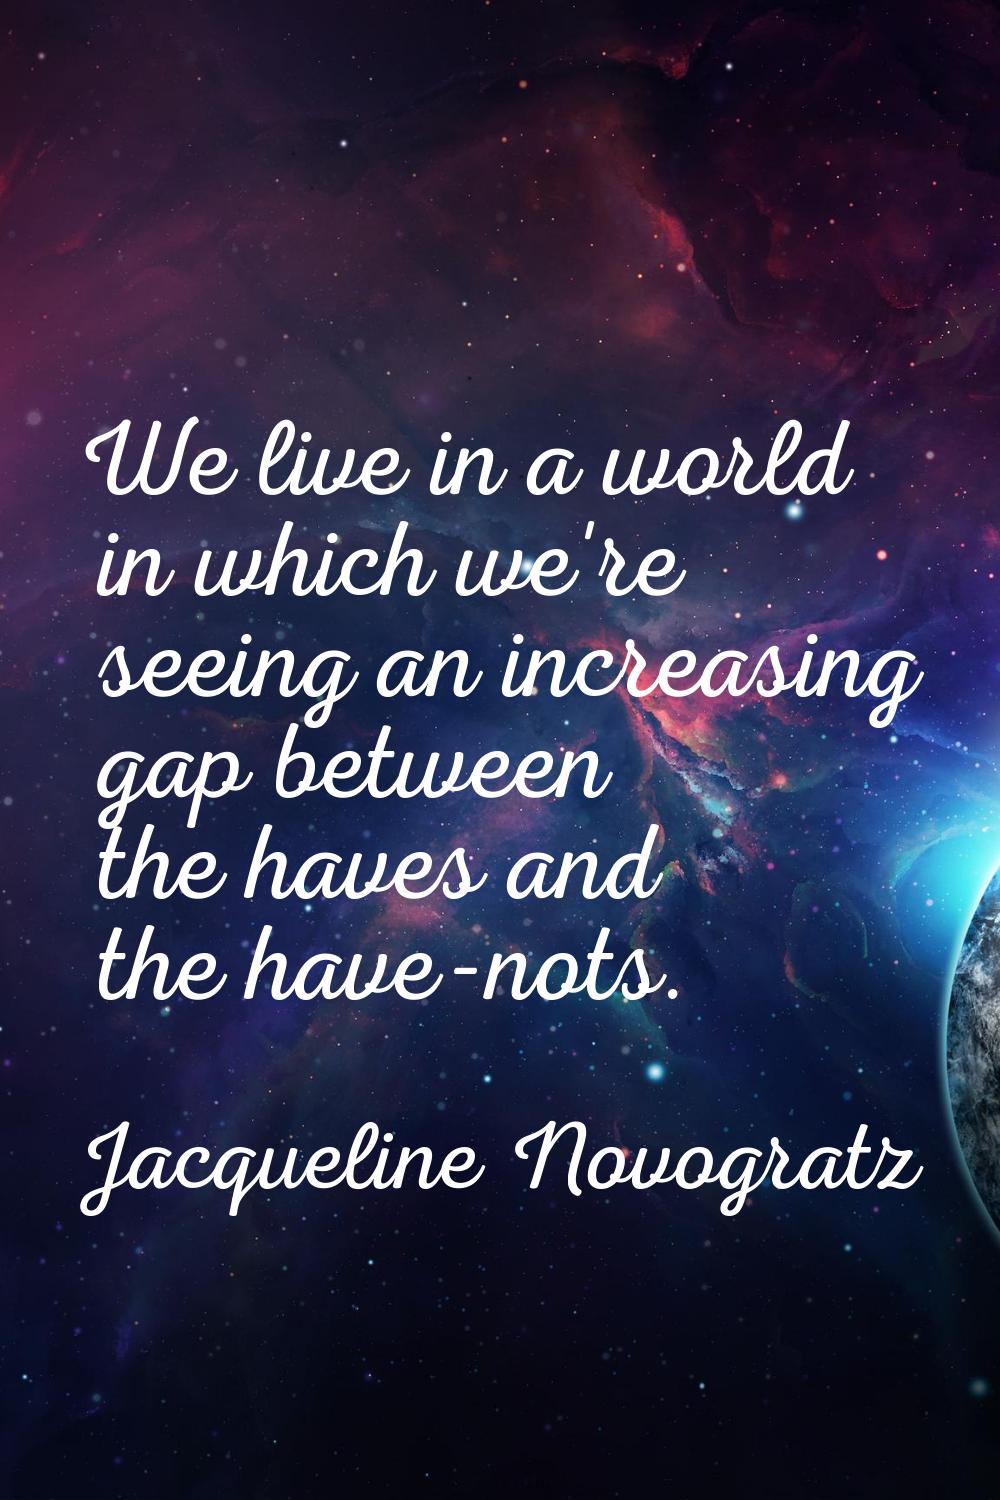 We live in a world in which we're seeing an increasing gap between the haves and the have-nots.